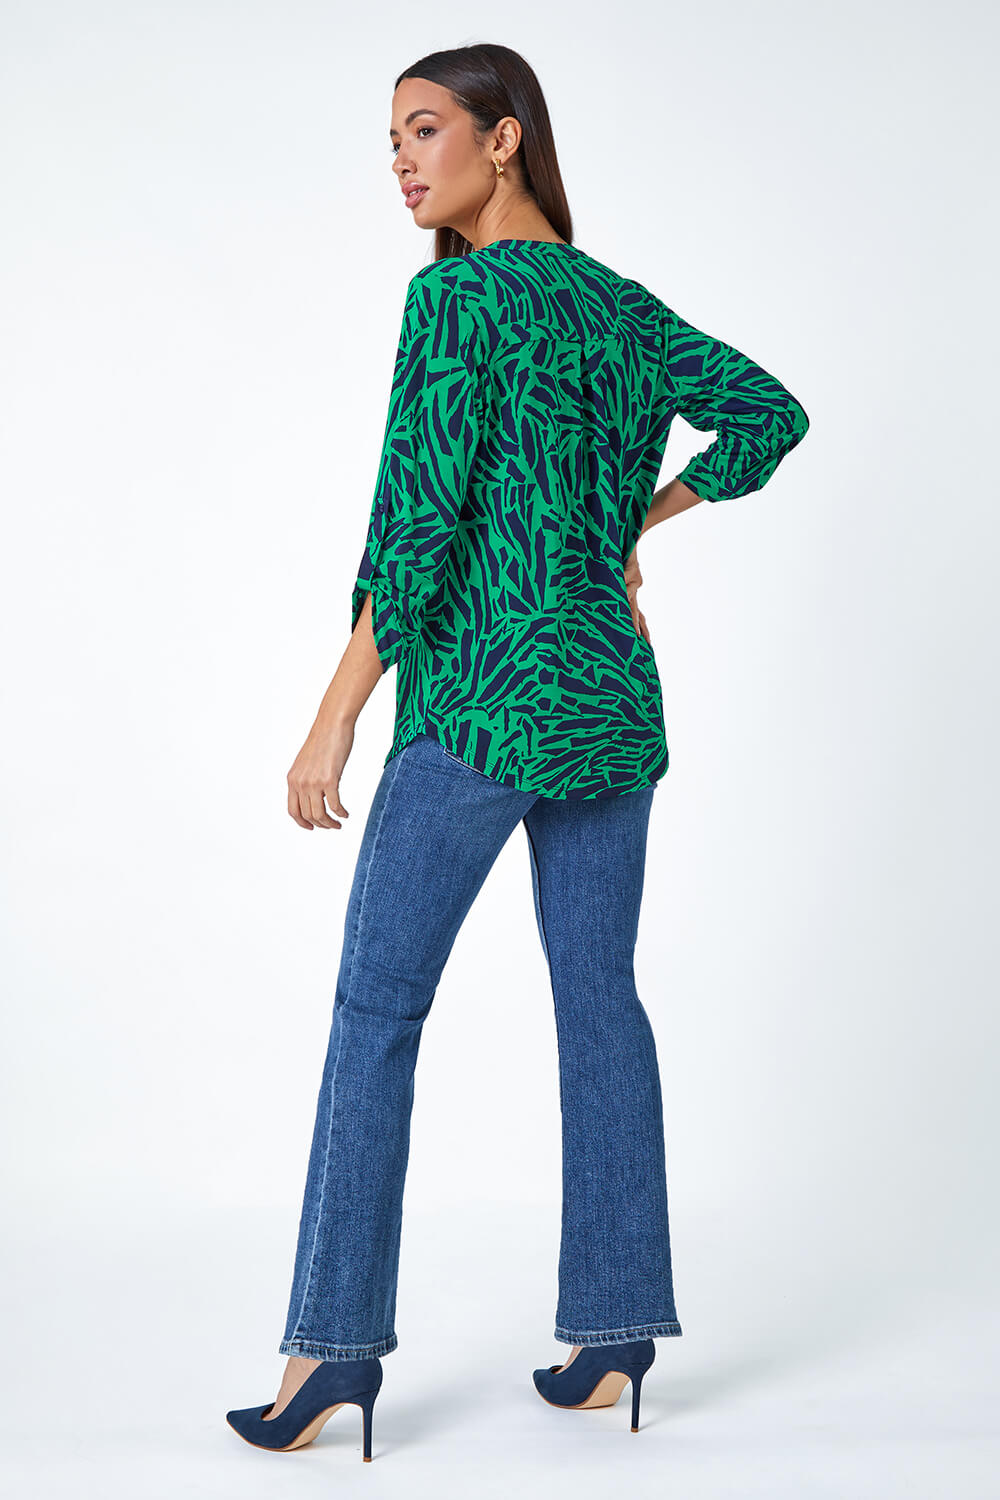 Green Abstract Animal Stretch Jersey Top, Image 3 of 5